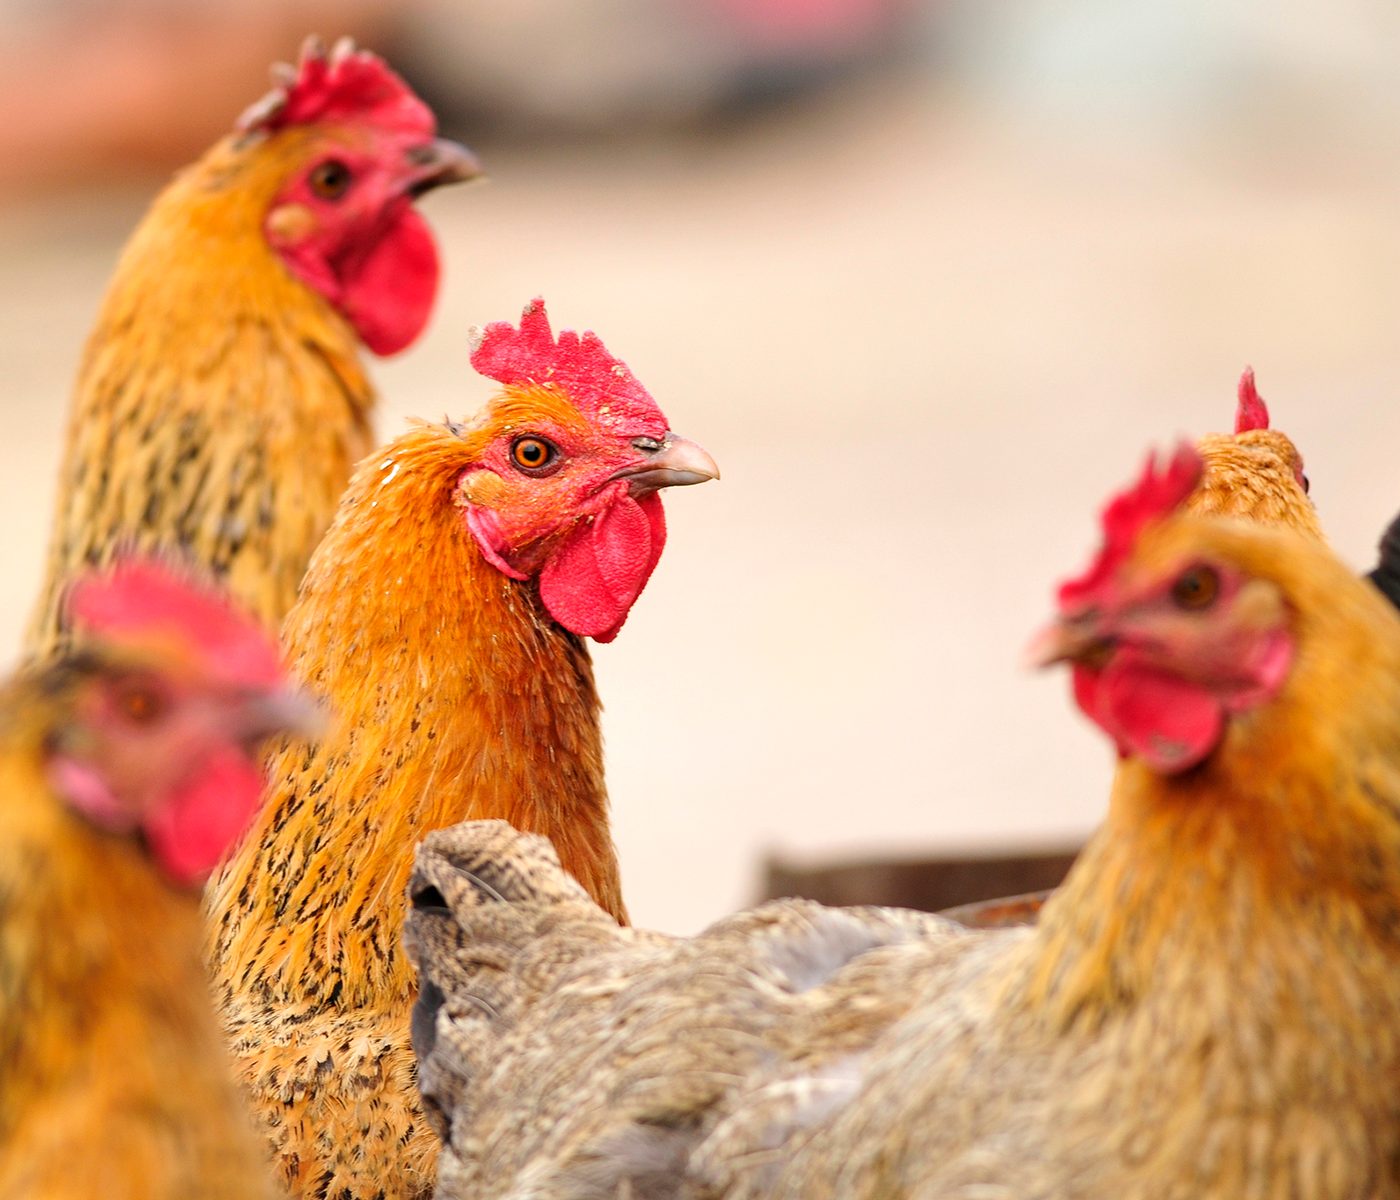 What happens with low calcium diets in laying hens?